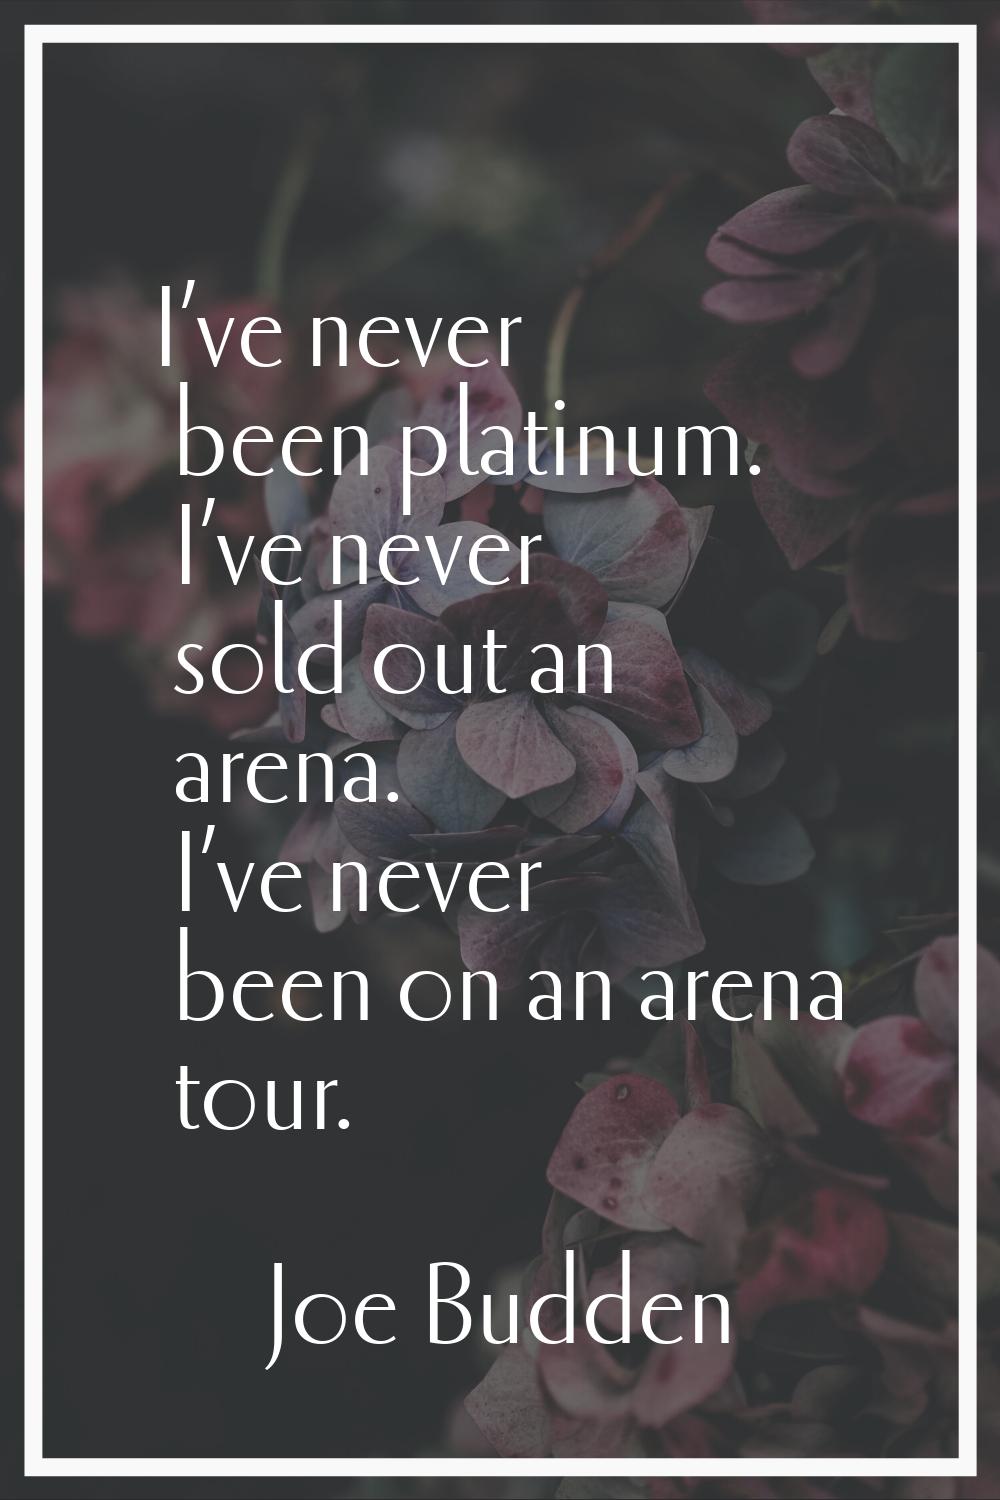 I’ve never been platinum. I’ve never sold out an arena. I’ve never been on an arena tour.